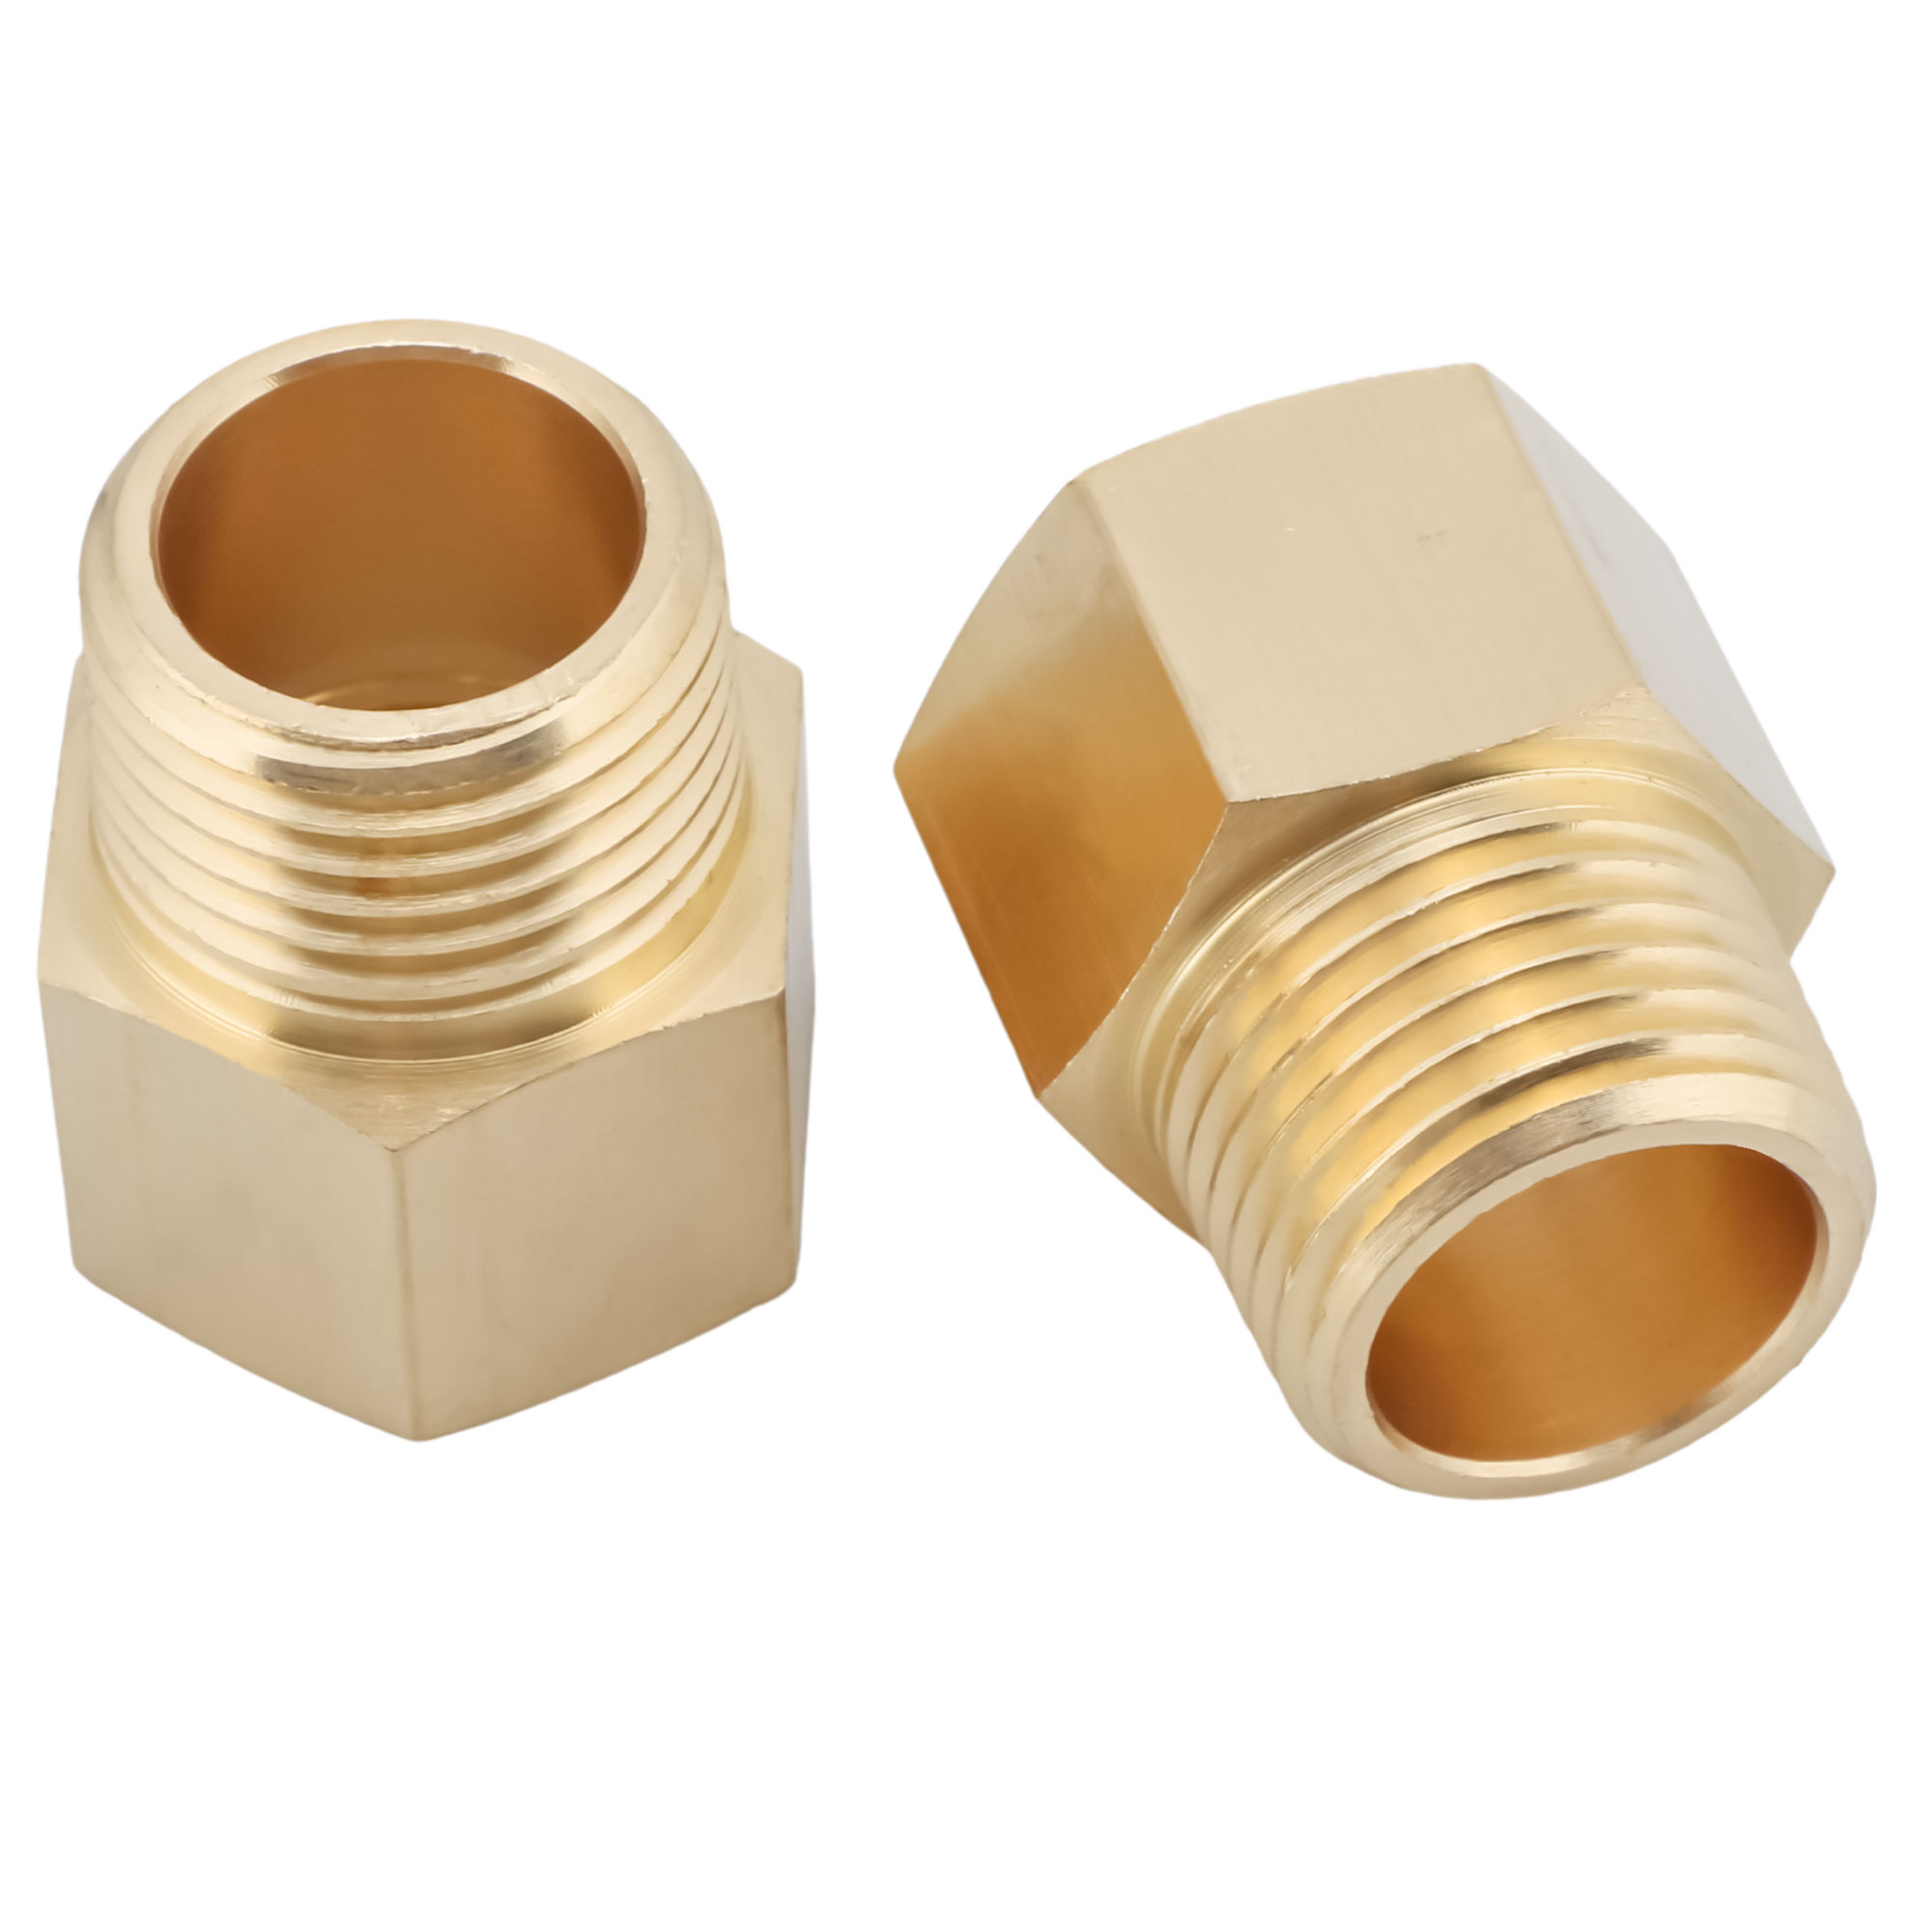 U.S. Solid 2pcs Brass Pipe Fitting Adapter, Male Pipe x Female Pipe, 1/2" x 1/2", 1/2" x 3/4", 1/4"x 1/4", 1/4" x 3/8", x 1/4", 1/8" x 1/8", 3/8" x 3/8" -